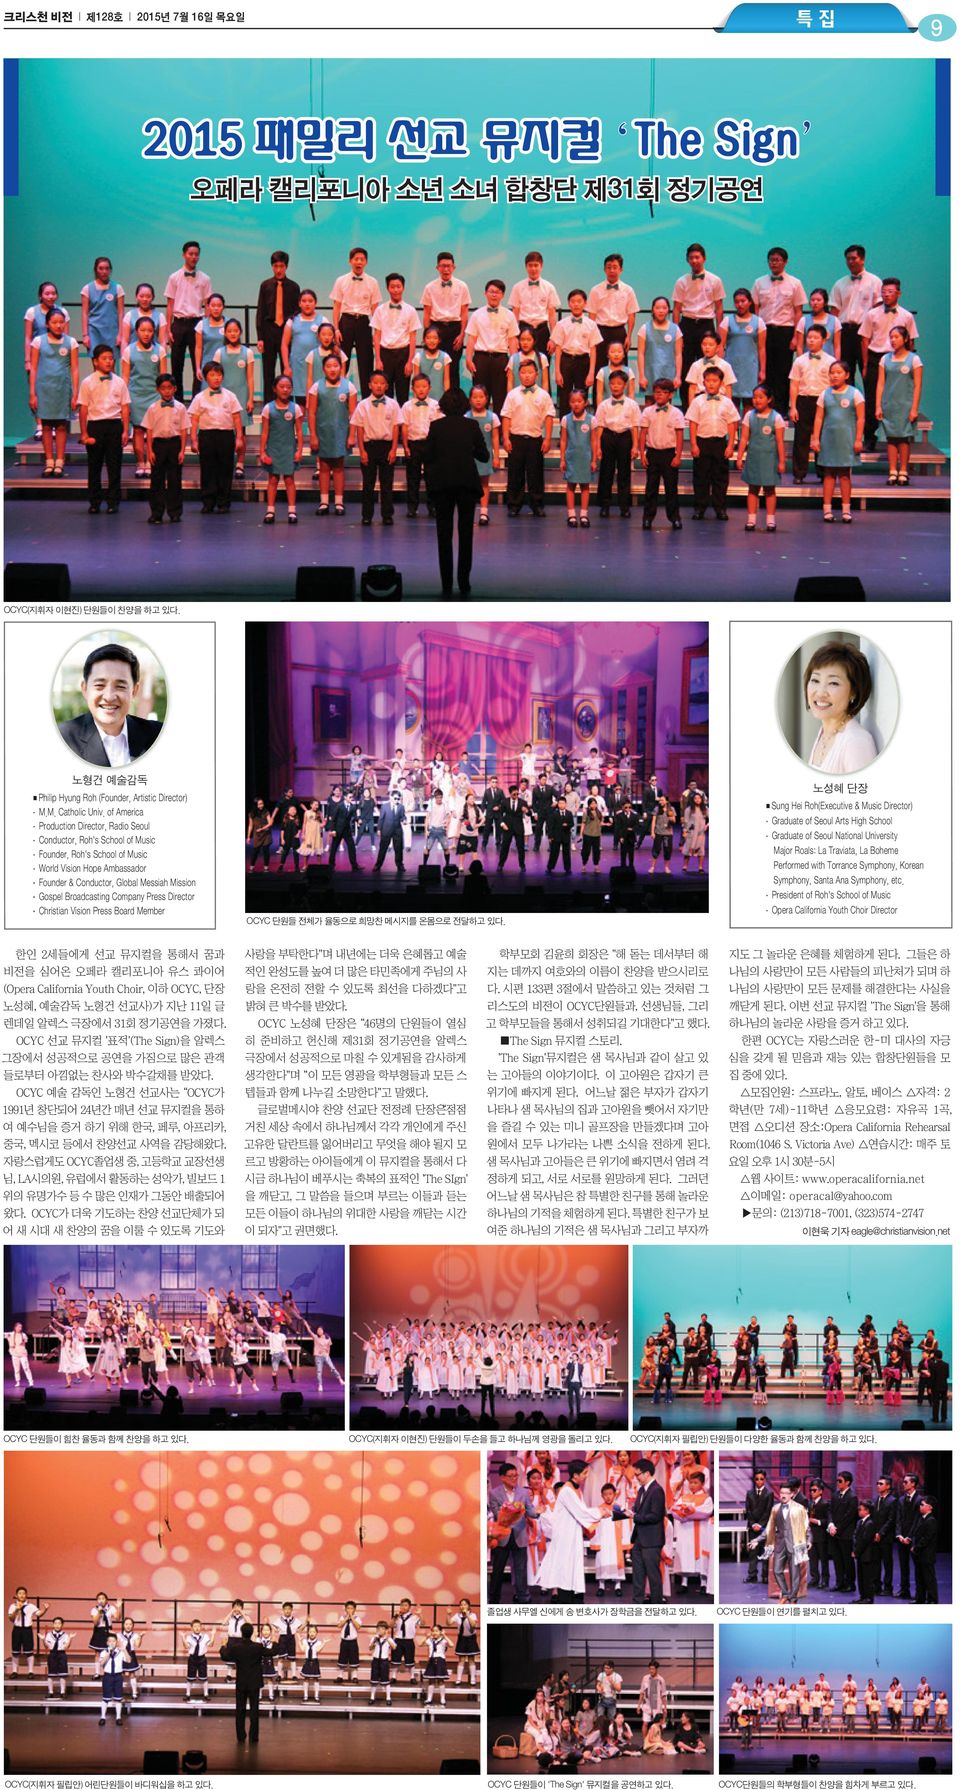 of America ^ Production Director, Radio Seoul ^ Conductor, Roh's School of Music ^ Founder, Roh's School of Music ^ World Vision Hope Ambassador ^ Founder & Conductor, Global Messiah Mission ^ Gospel